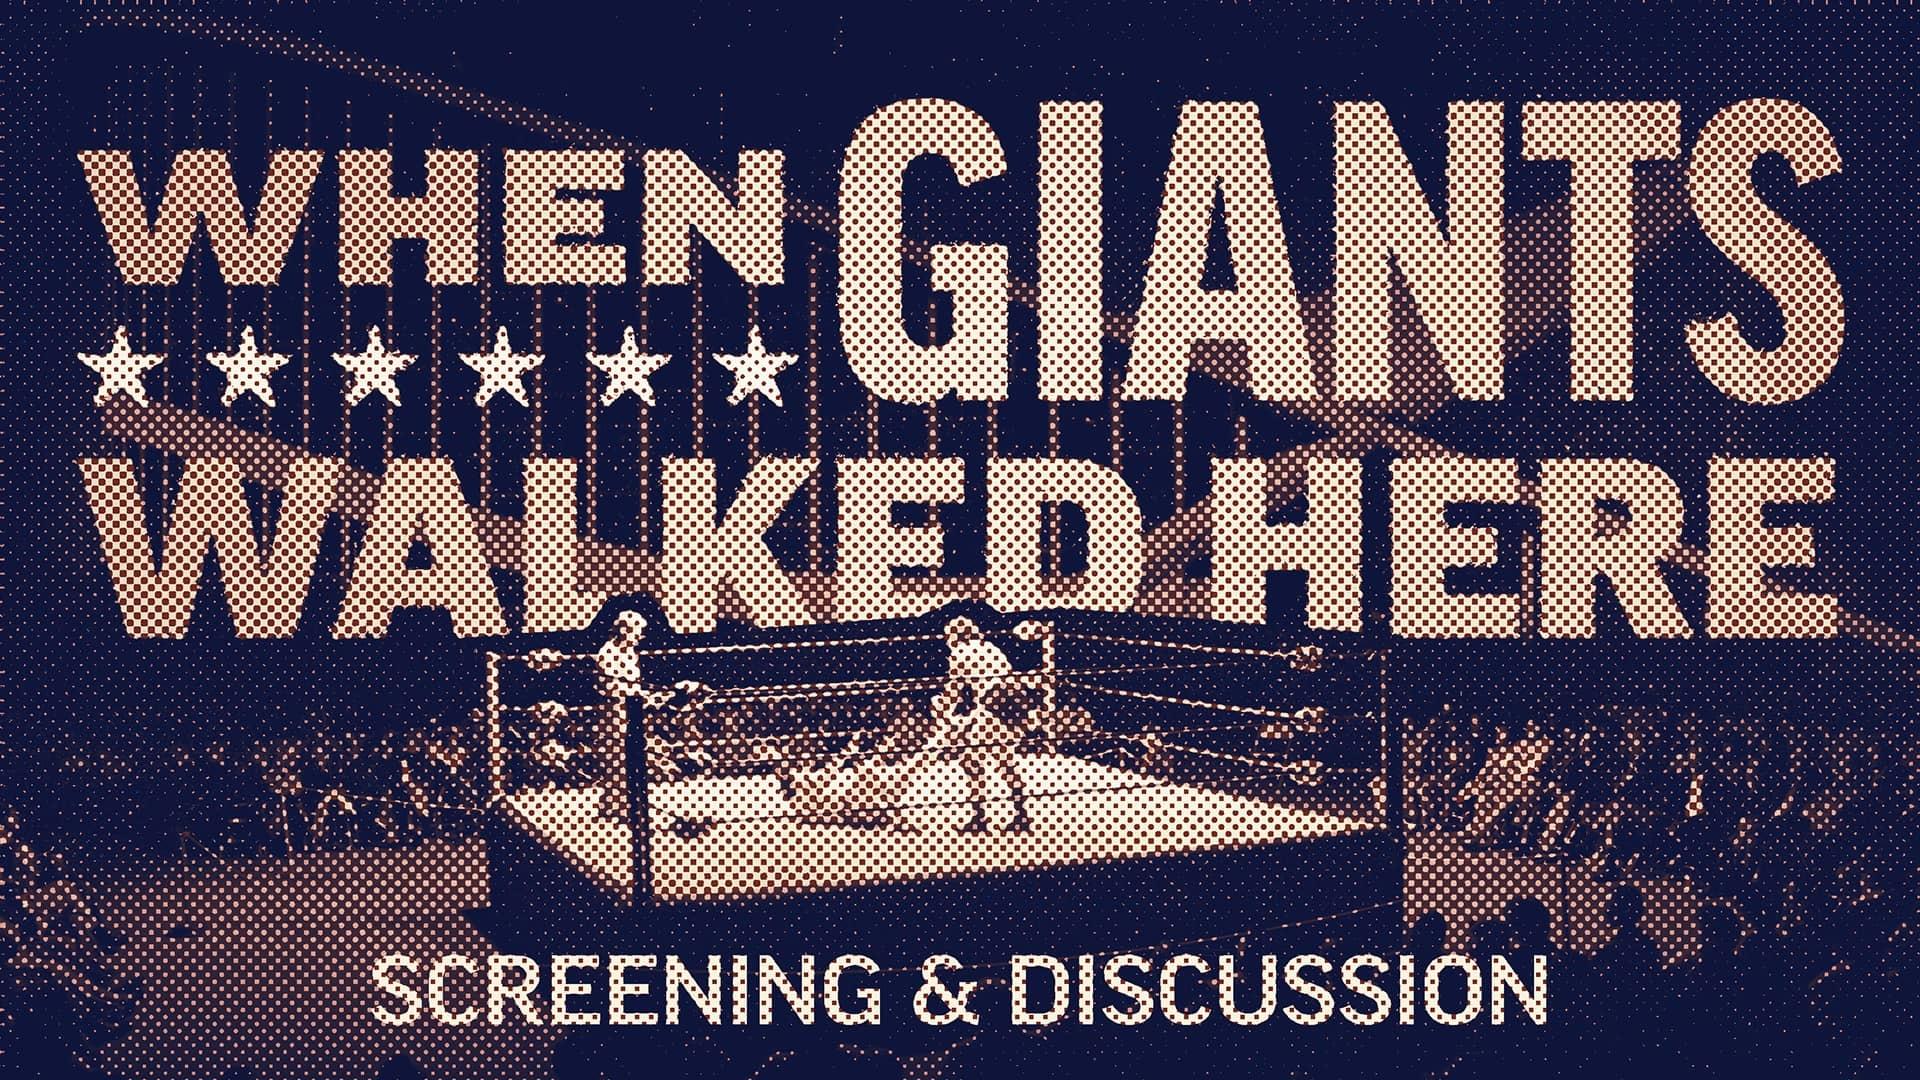 When Giants Walked Here key art with the text, "Screening & Discussion" at the bottom.